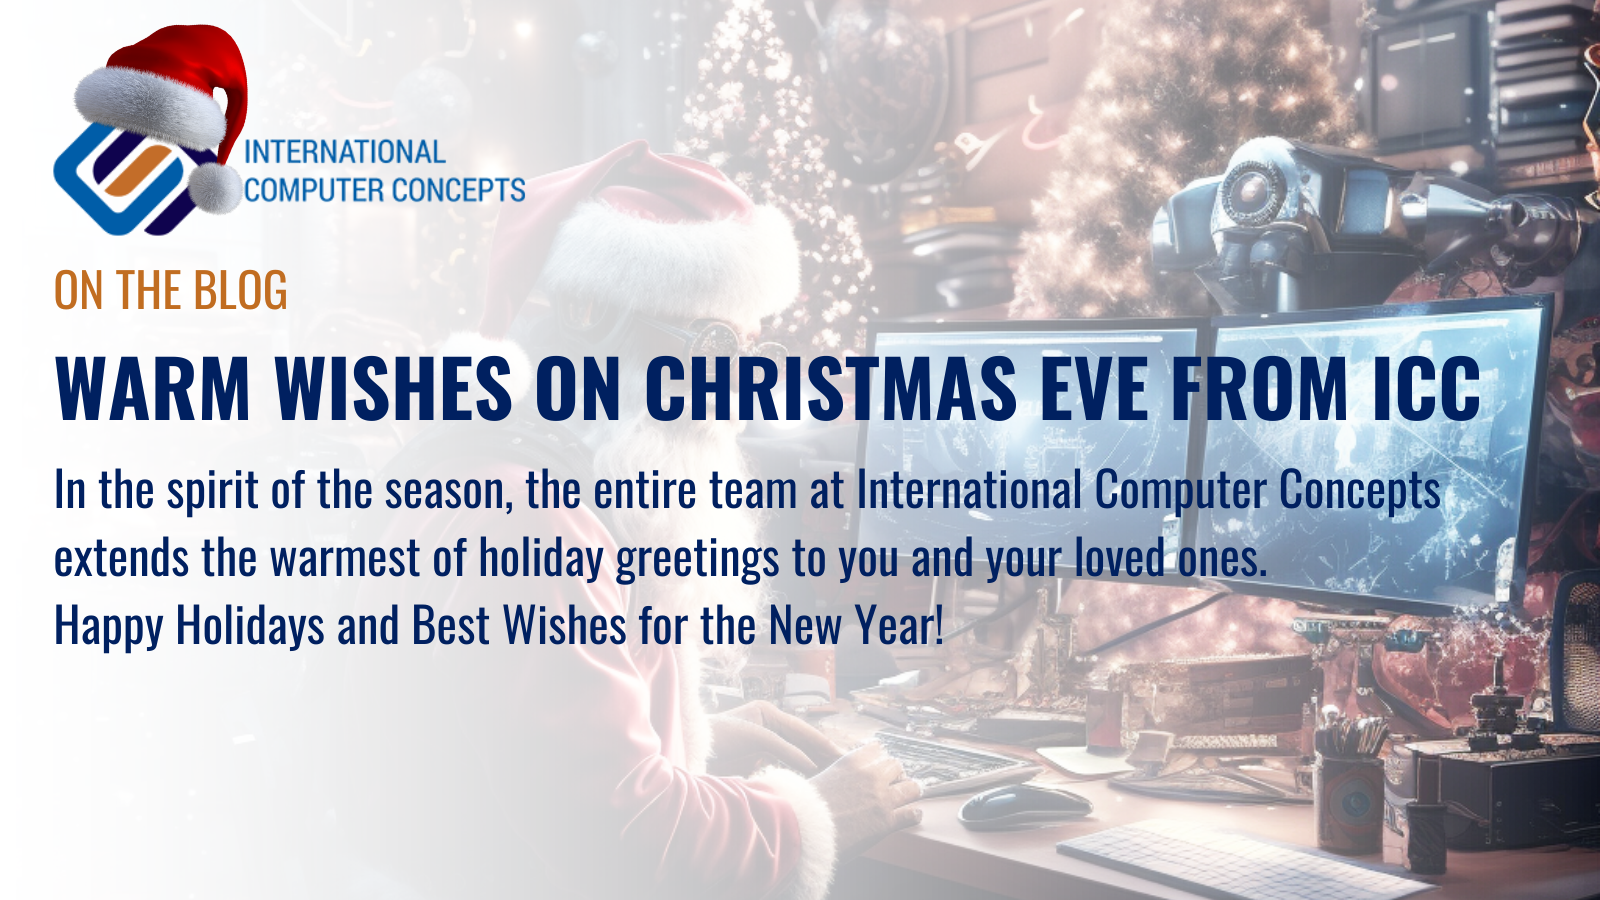 Warm Wishes from ICC - Your Holiday Greeting Awaits!